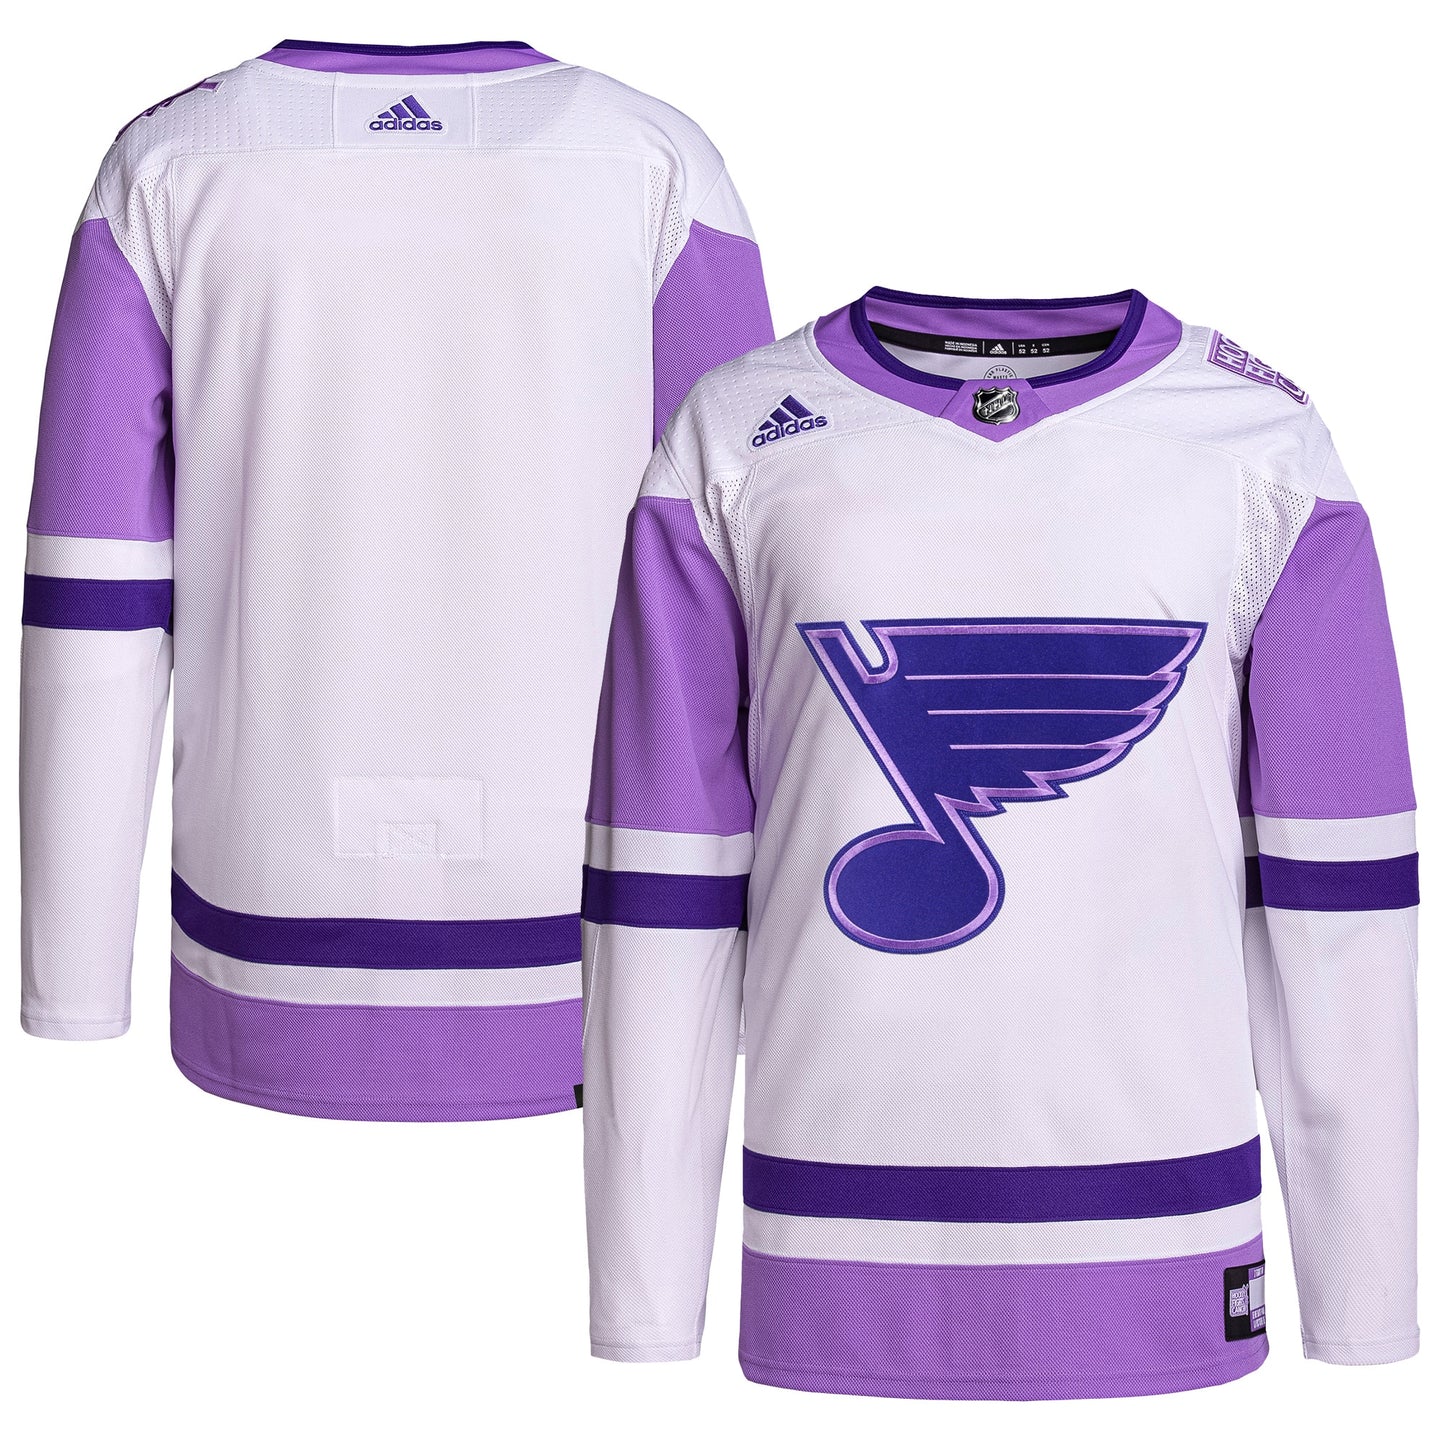 St. Louis Blues adidas Hockey Fights Cancer Primegreen Authentic Blank Practice Jersey - White/Purple